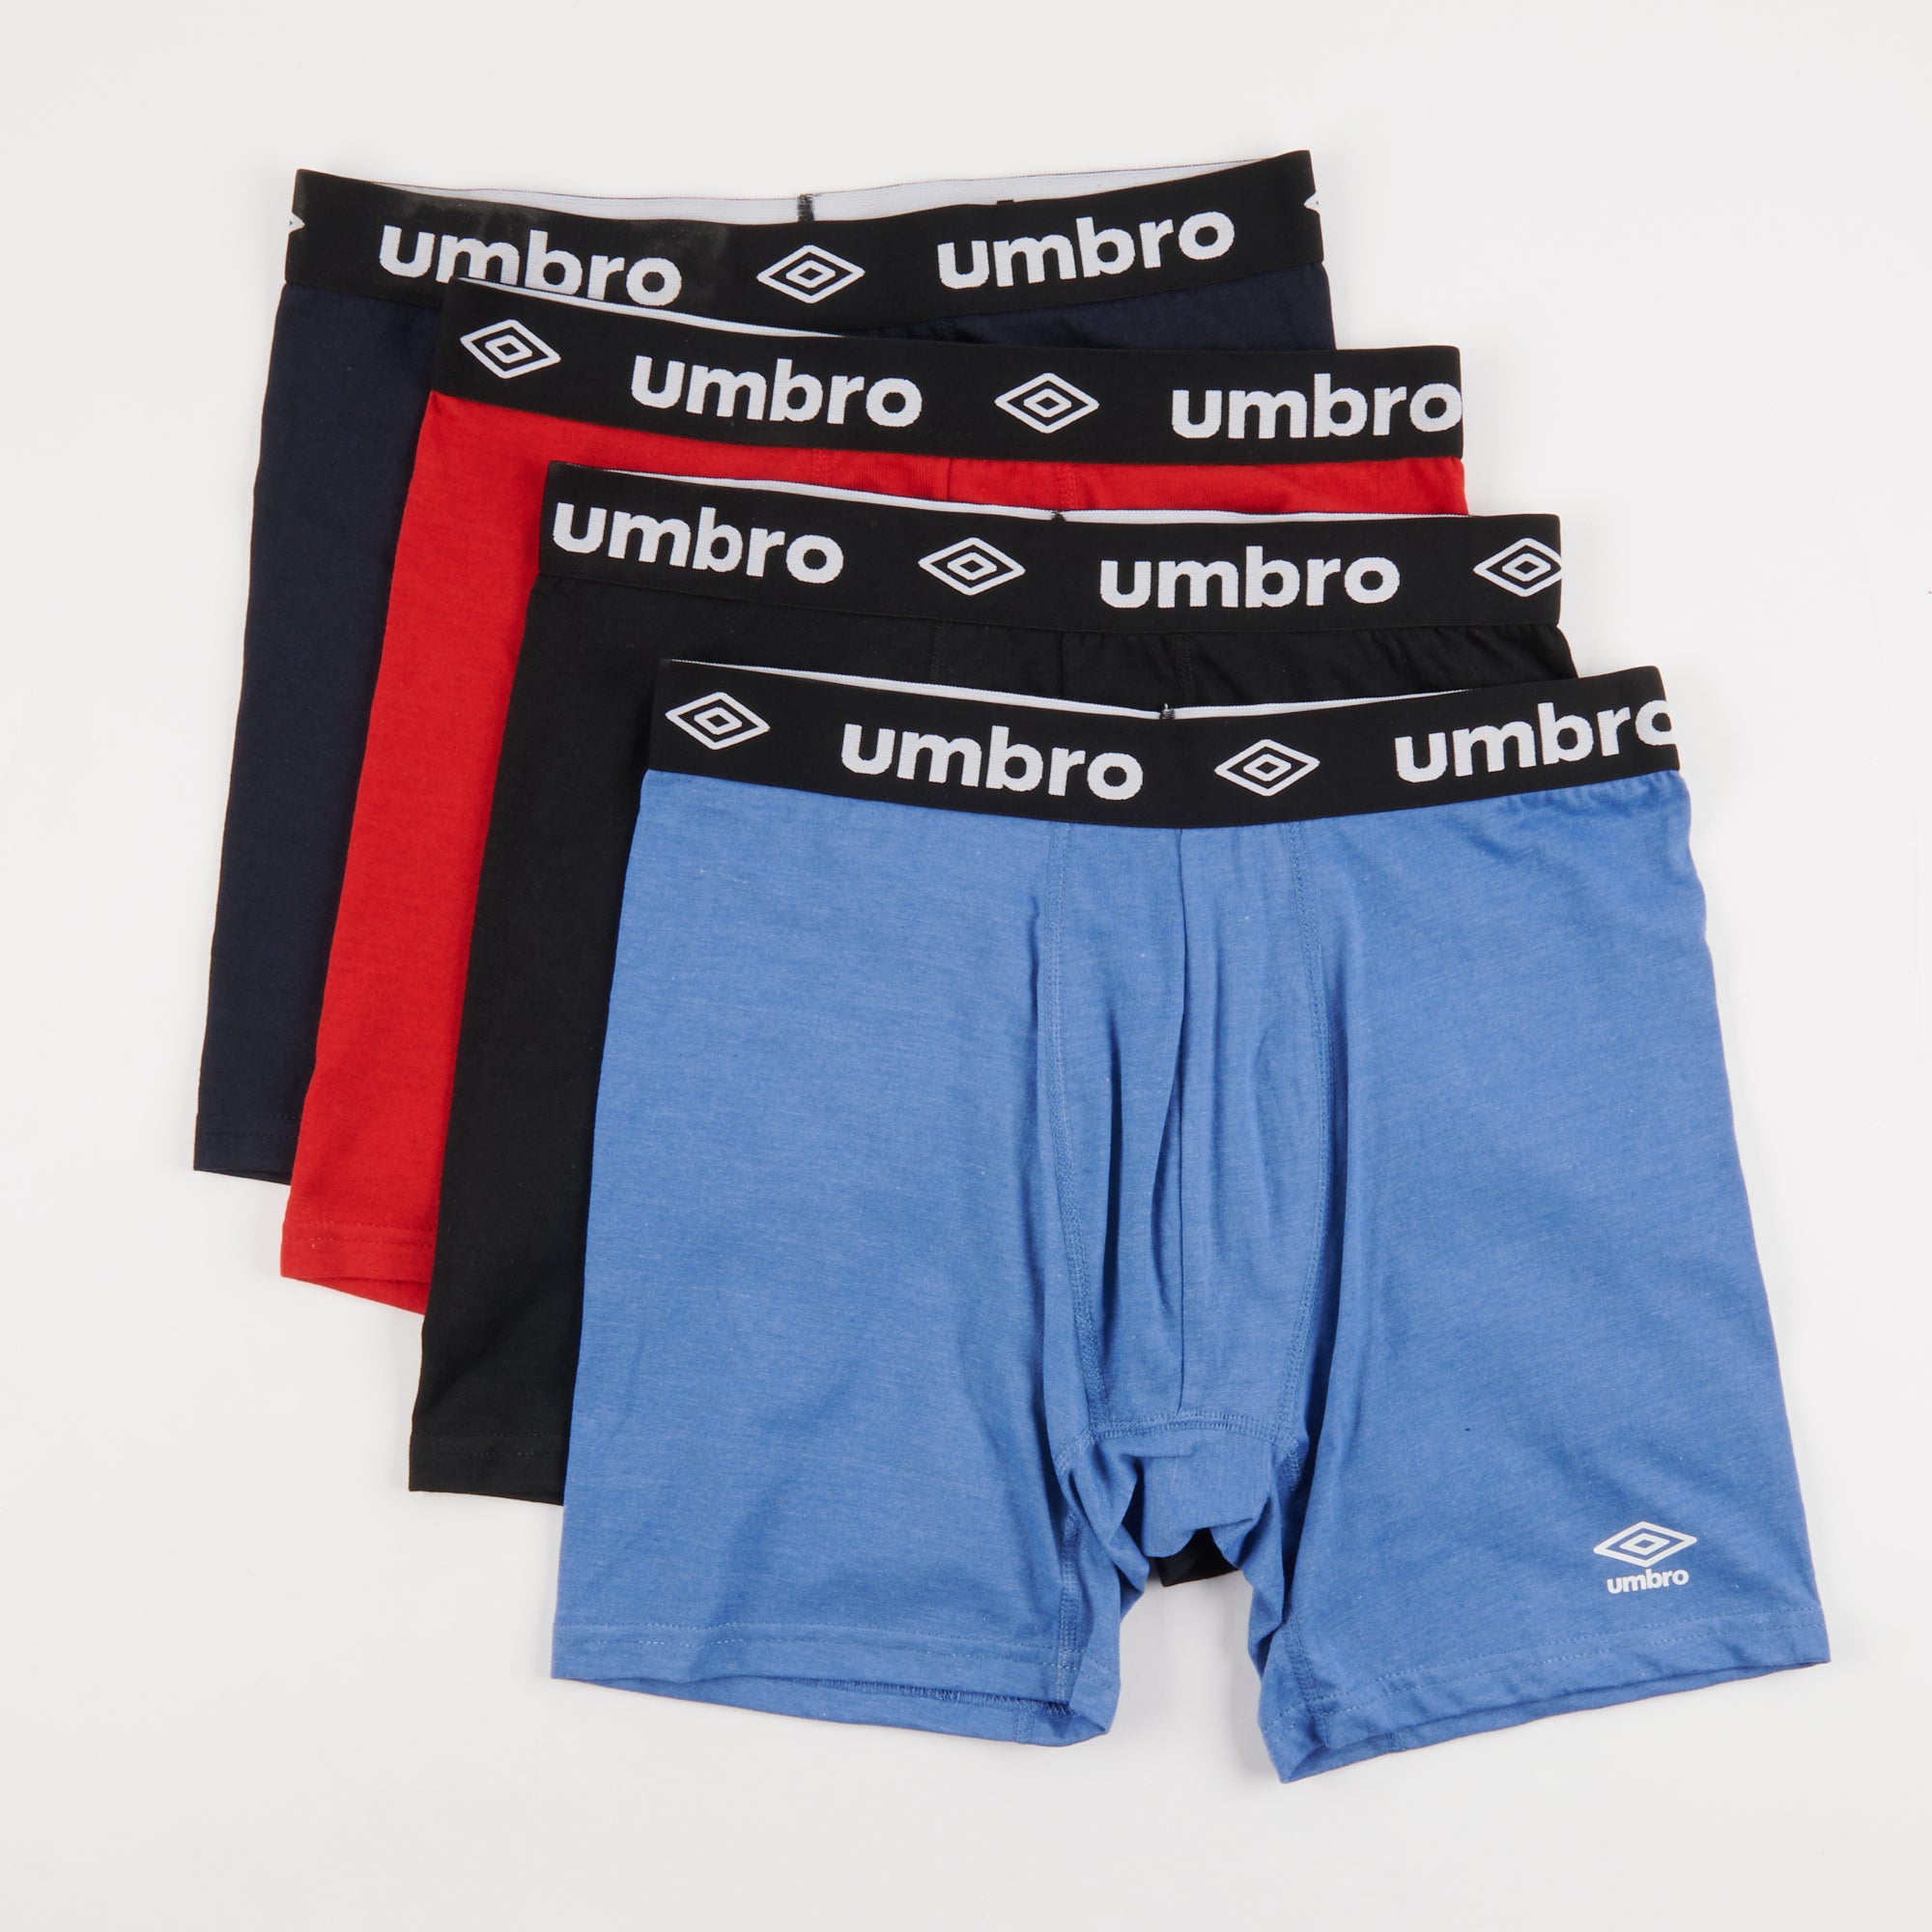  Umbro Mens Boxer Briefs Breathable Cotton Underwear for Men - 6  Pack Cotton Stretch Mens Underwear (Small, Black) : Clothing, Shoes &  Jewelry